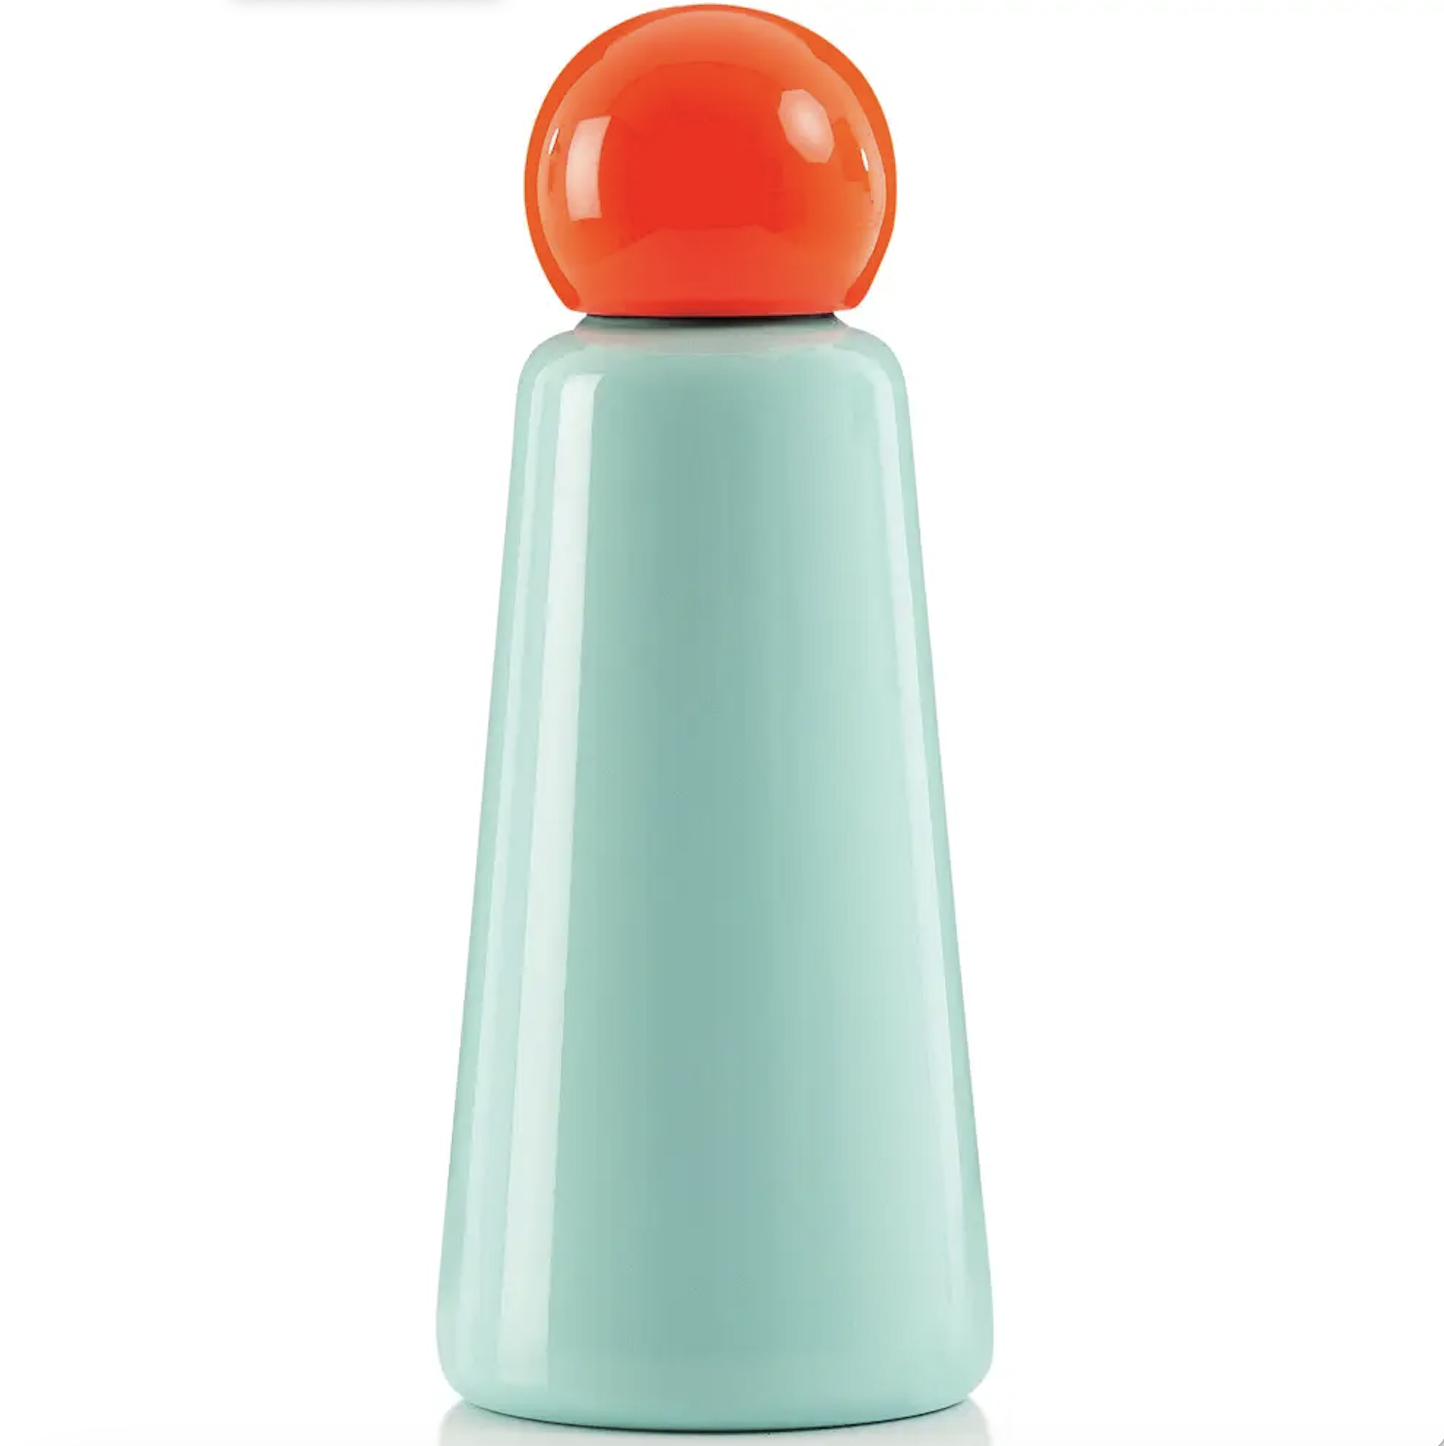 Lund London Skittle Bottle, Mint with Coral Lid 500ml